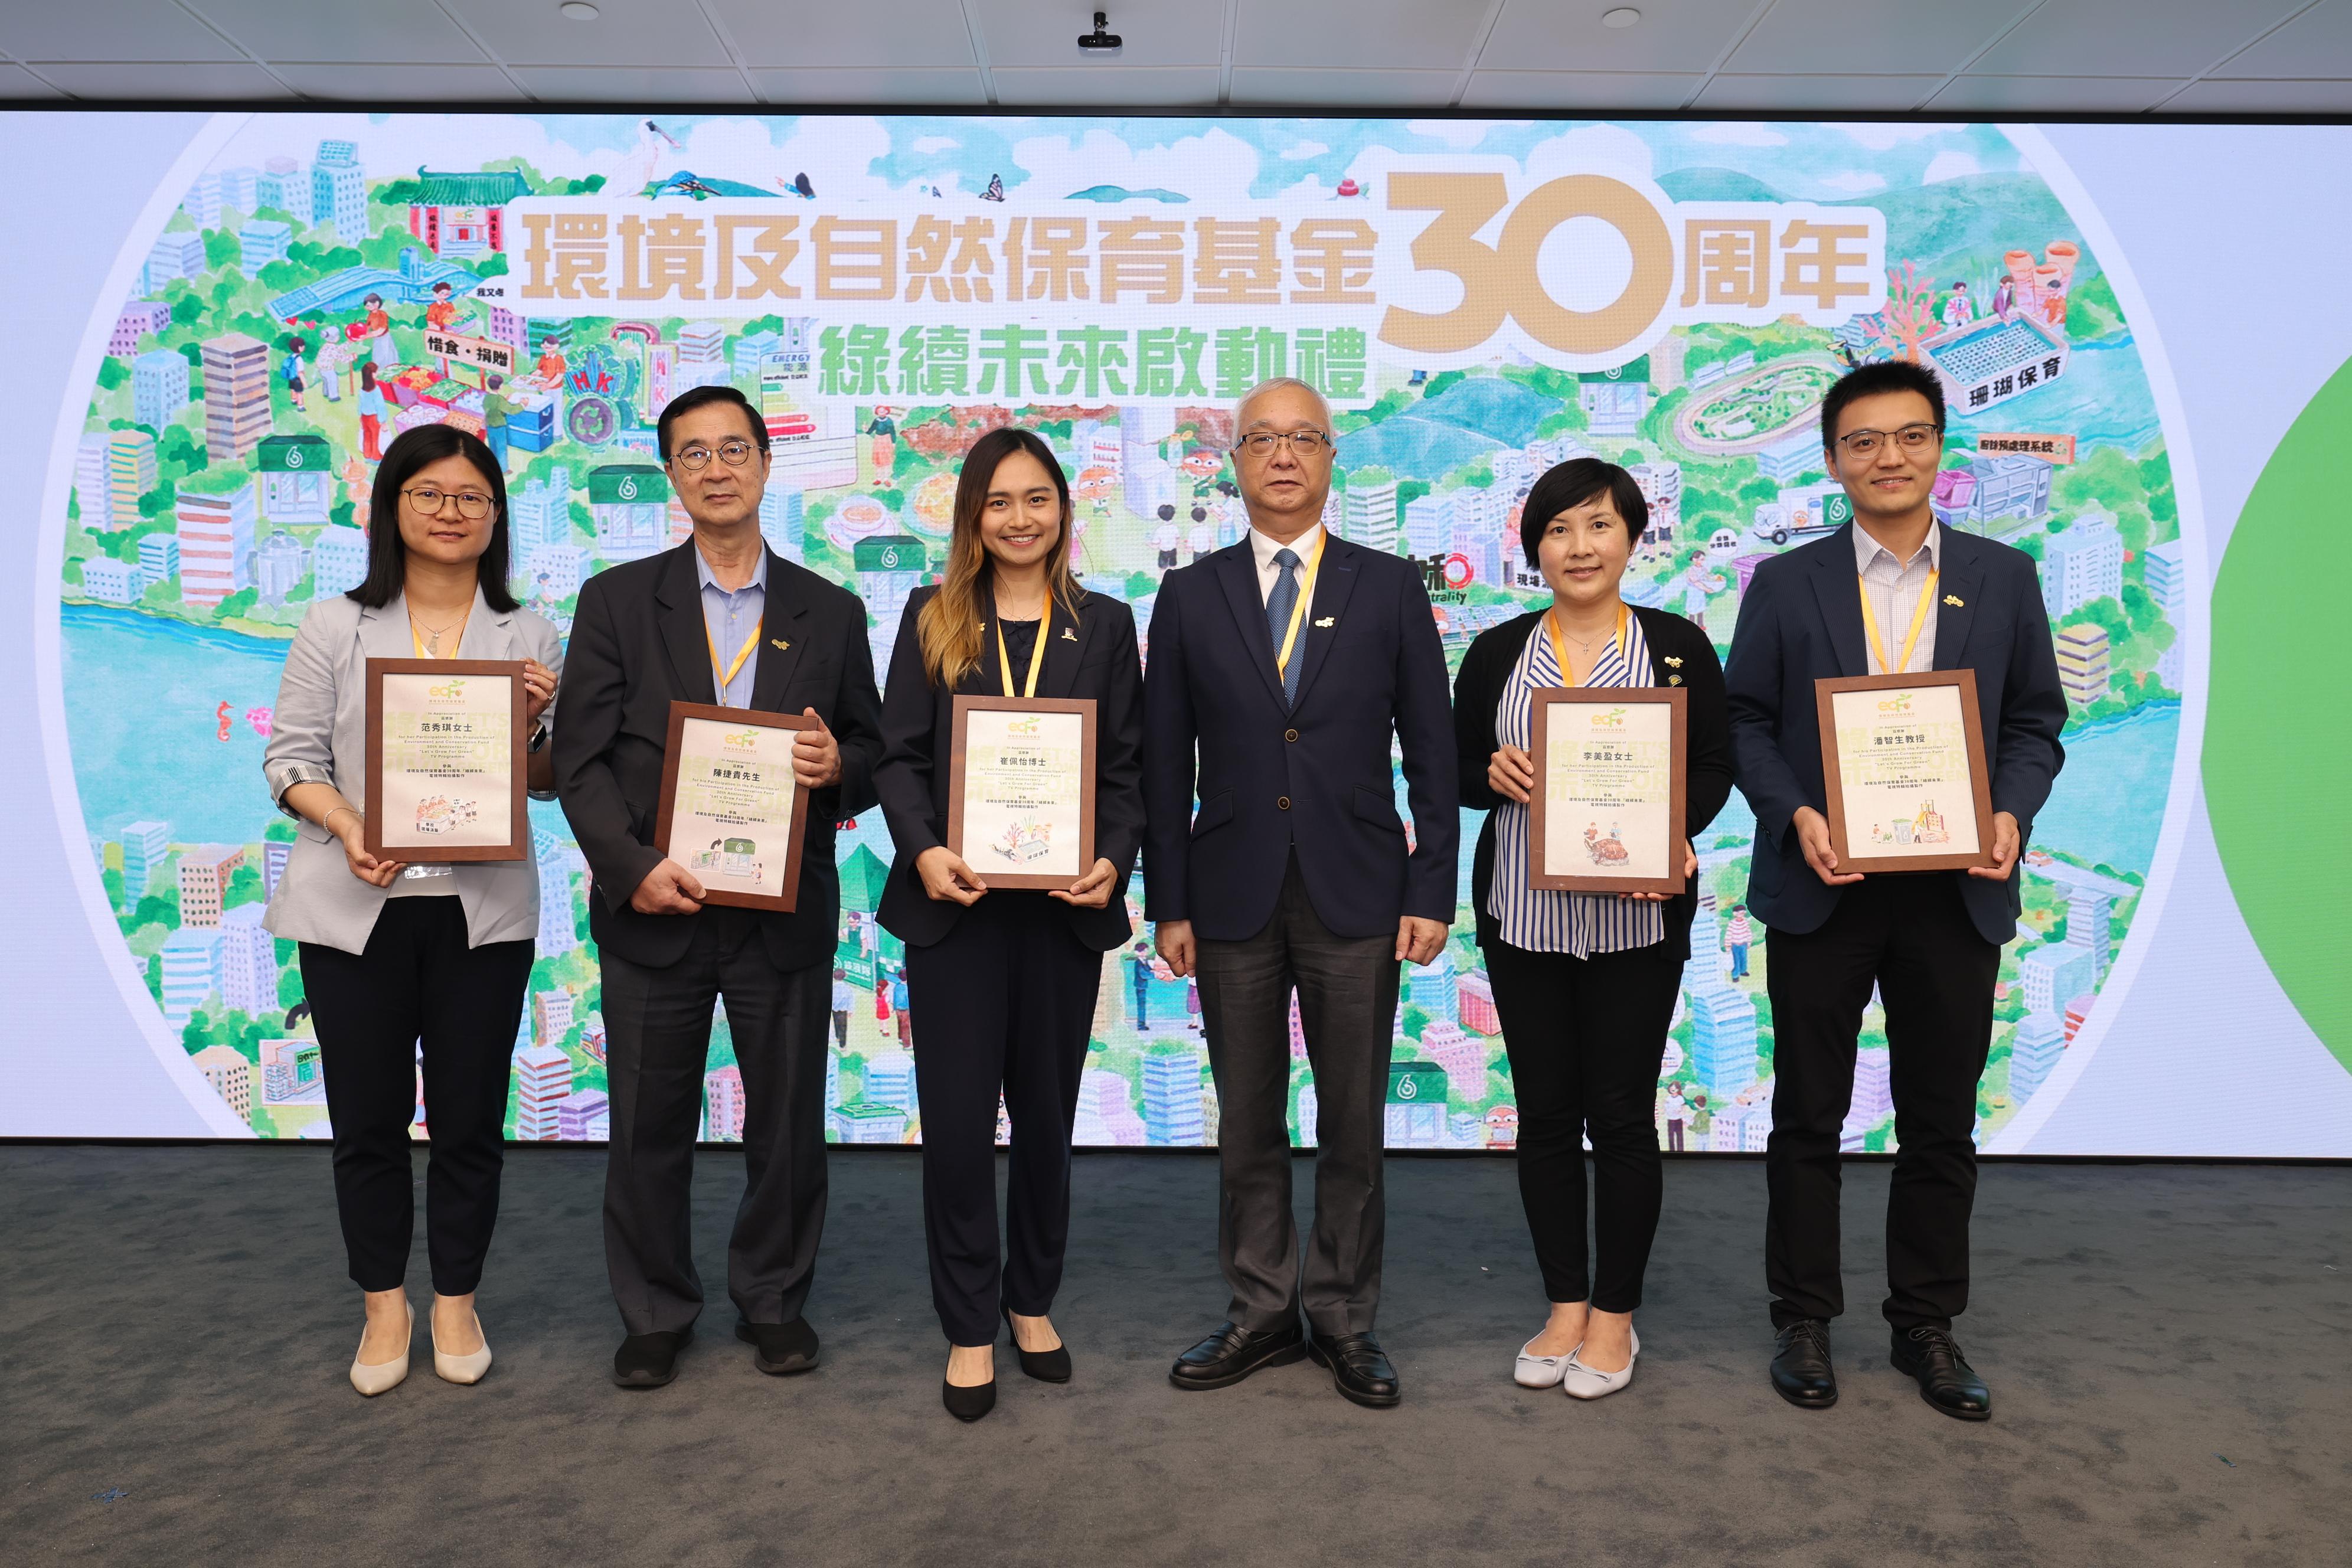 The Environment and Conservation Fund (ECF) 30th anniversary "Let's Grow for Green" launching ceremony was held at the Hong Kong Productivity Council Building in Kowloon today (June 3). Photo shows the Secretary for Environment and Ecology, Mr Tse Chin-wan (third right), presenting appreciation certificates to the guests participating in the ECF 30th anniversary television programme at the launching ceremony.